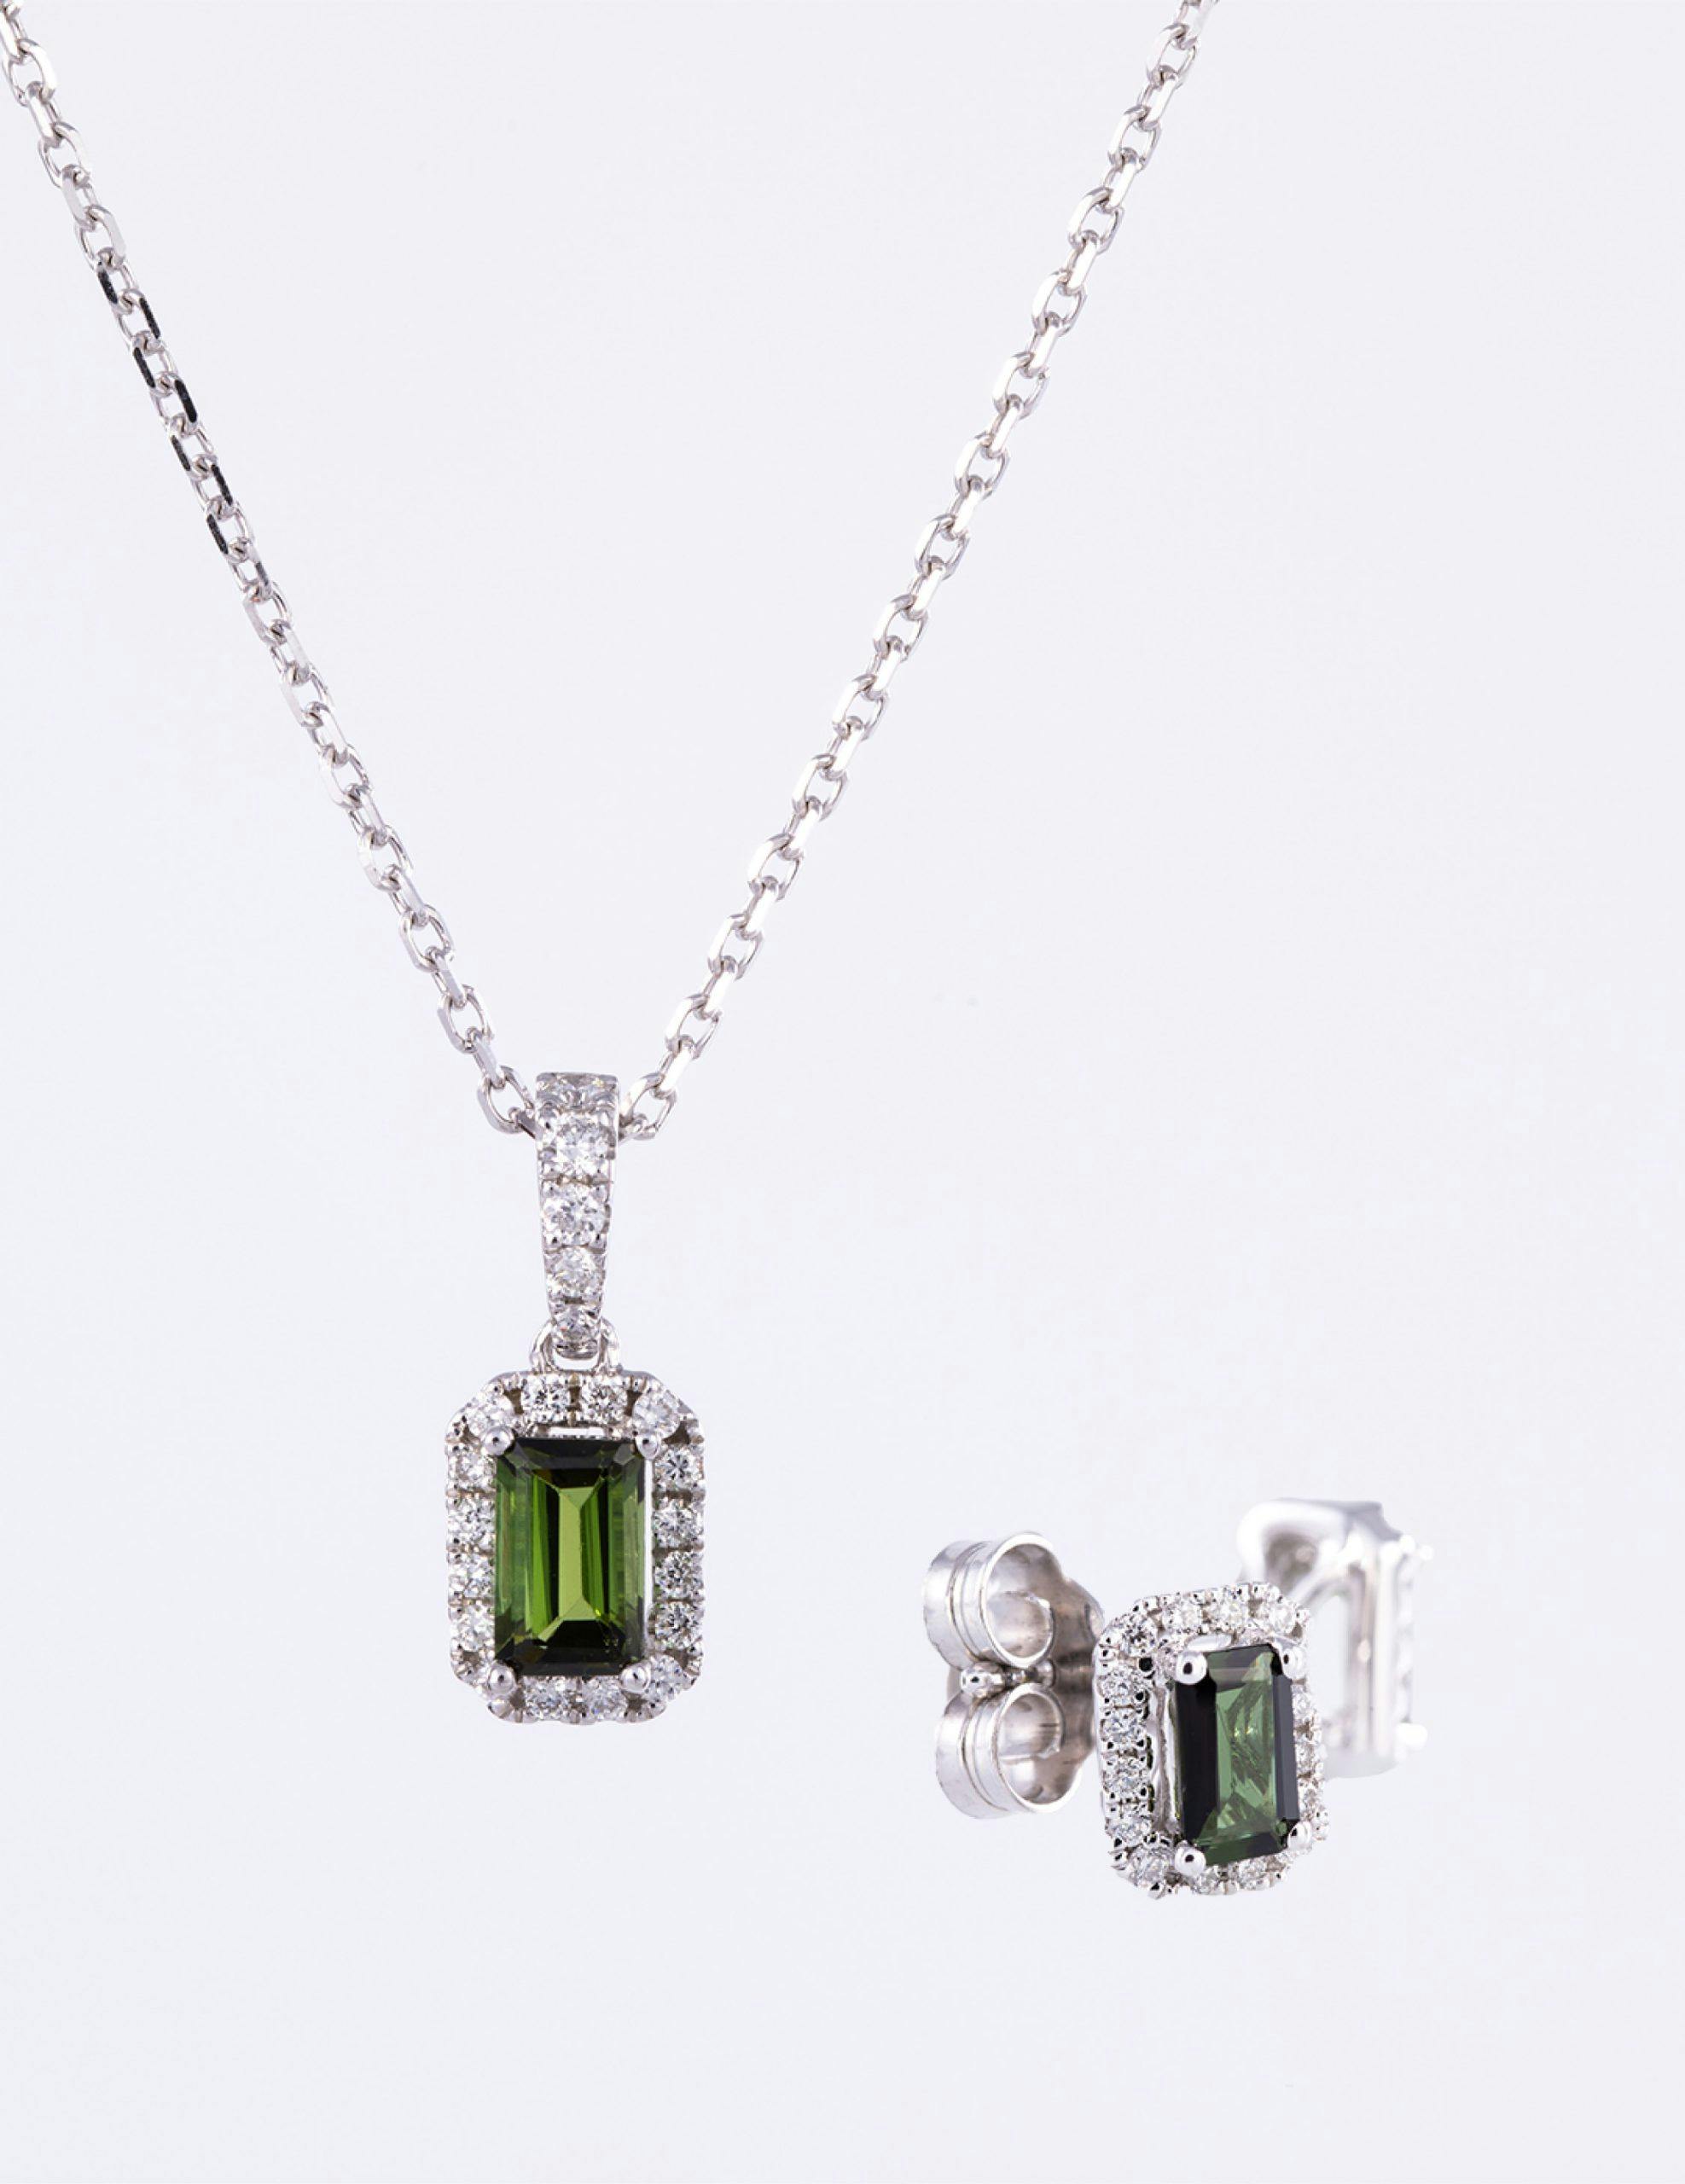 Green Tourmaline and Diamond Necklace and Earrings